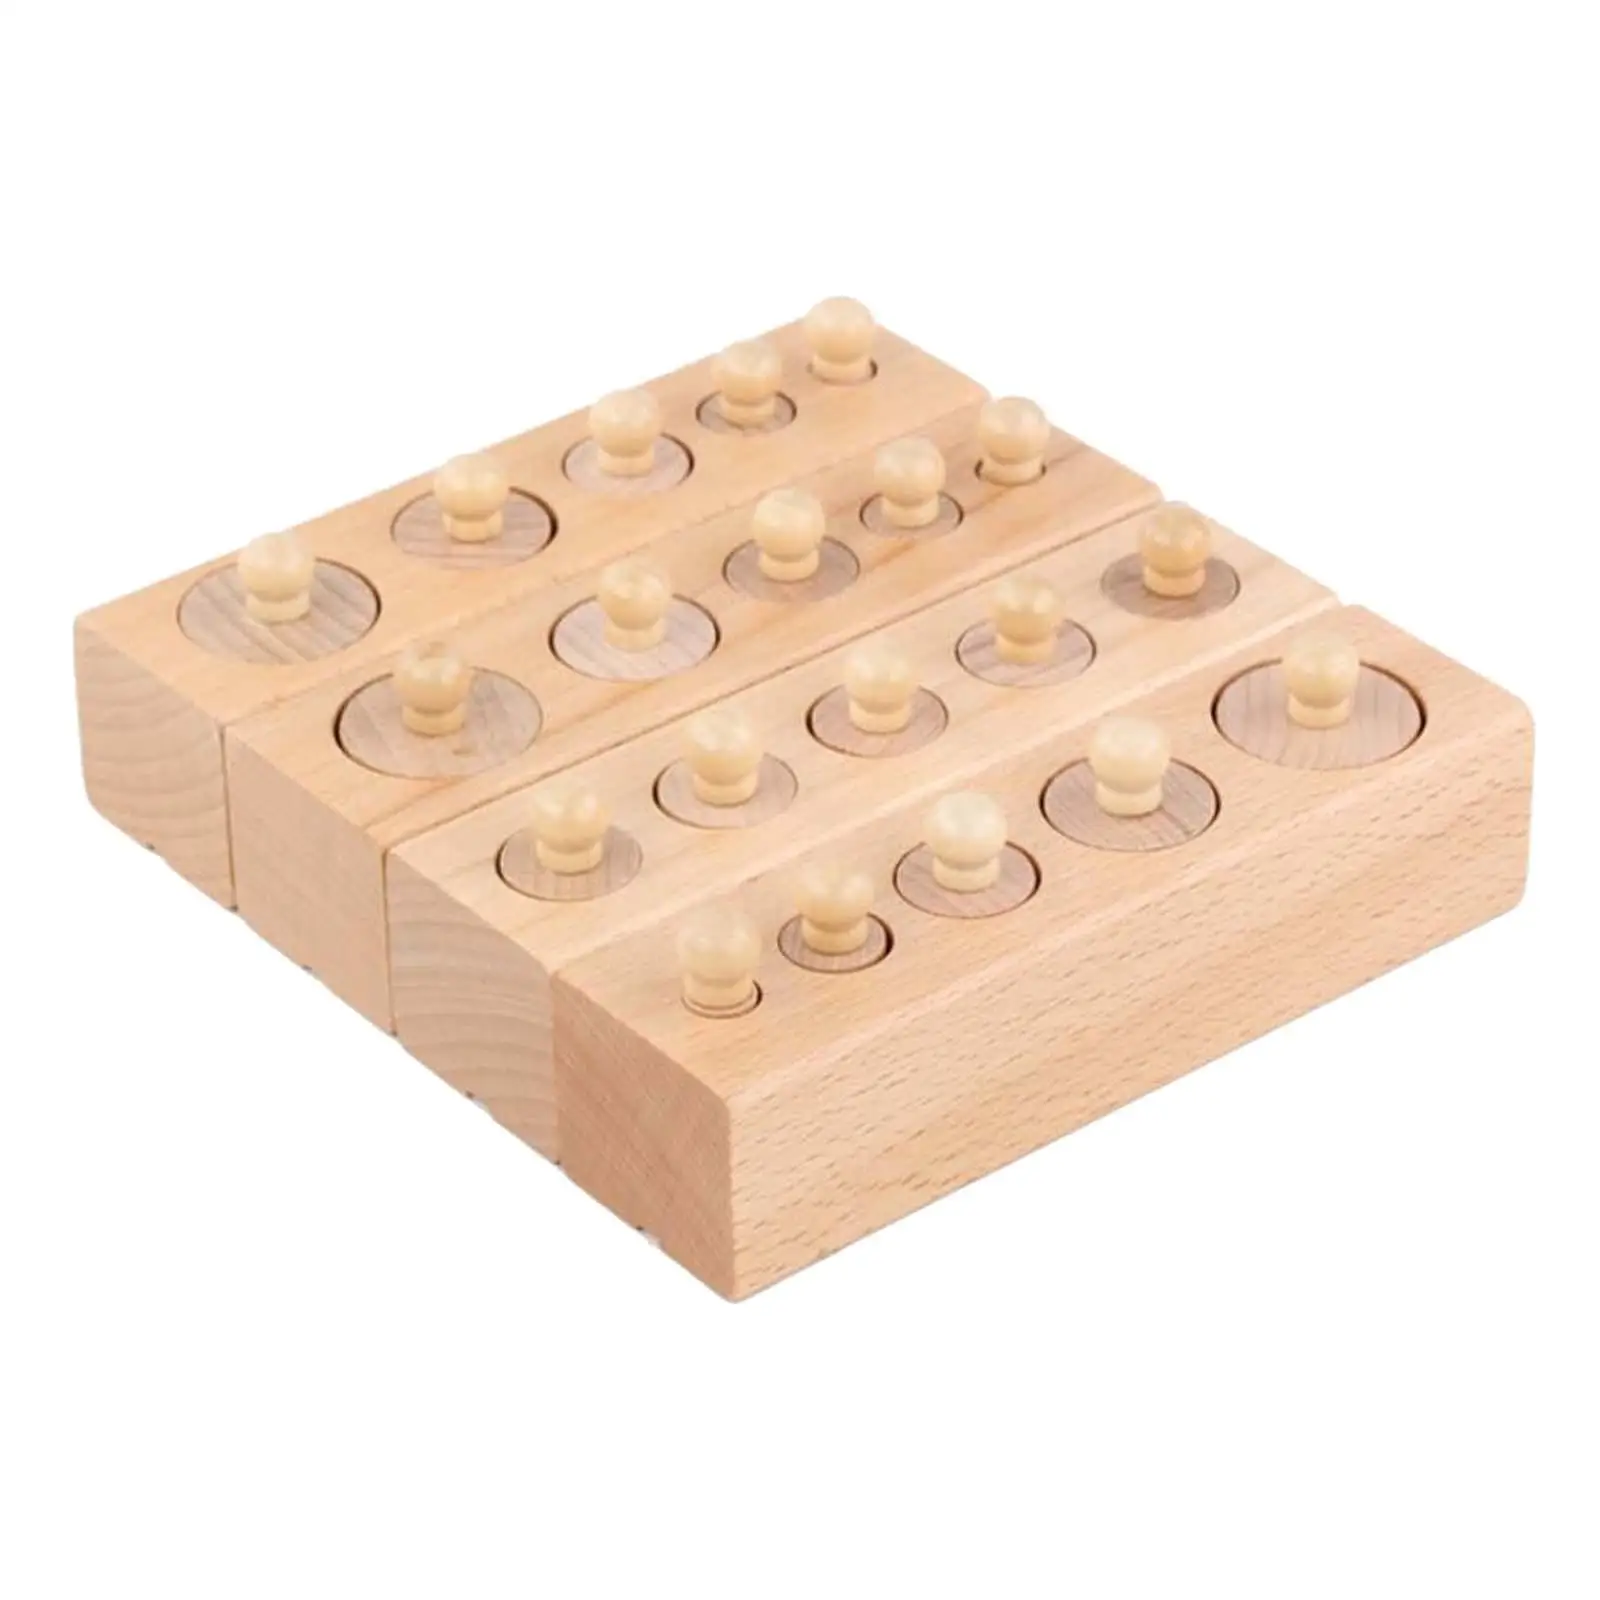 4Pcs Wooden Cylinders Ladder Blocks Early Development Coordination Montessori Knobbed Cylinders for Home School Childern Baby